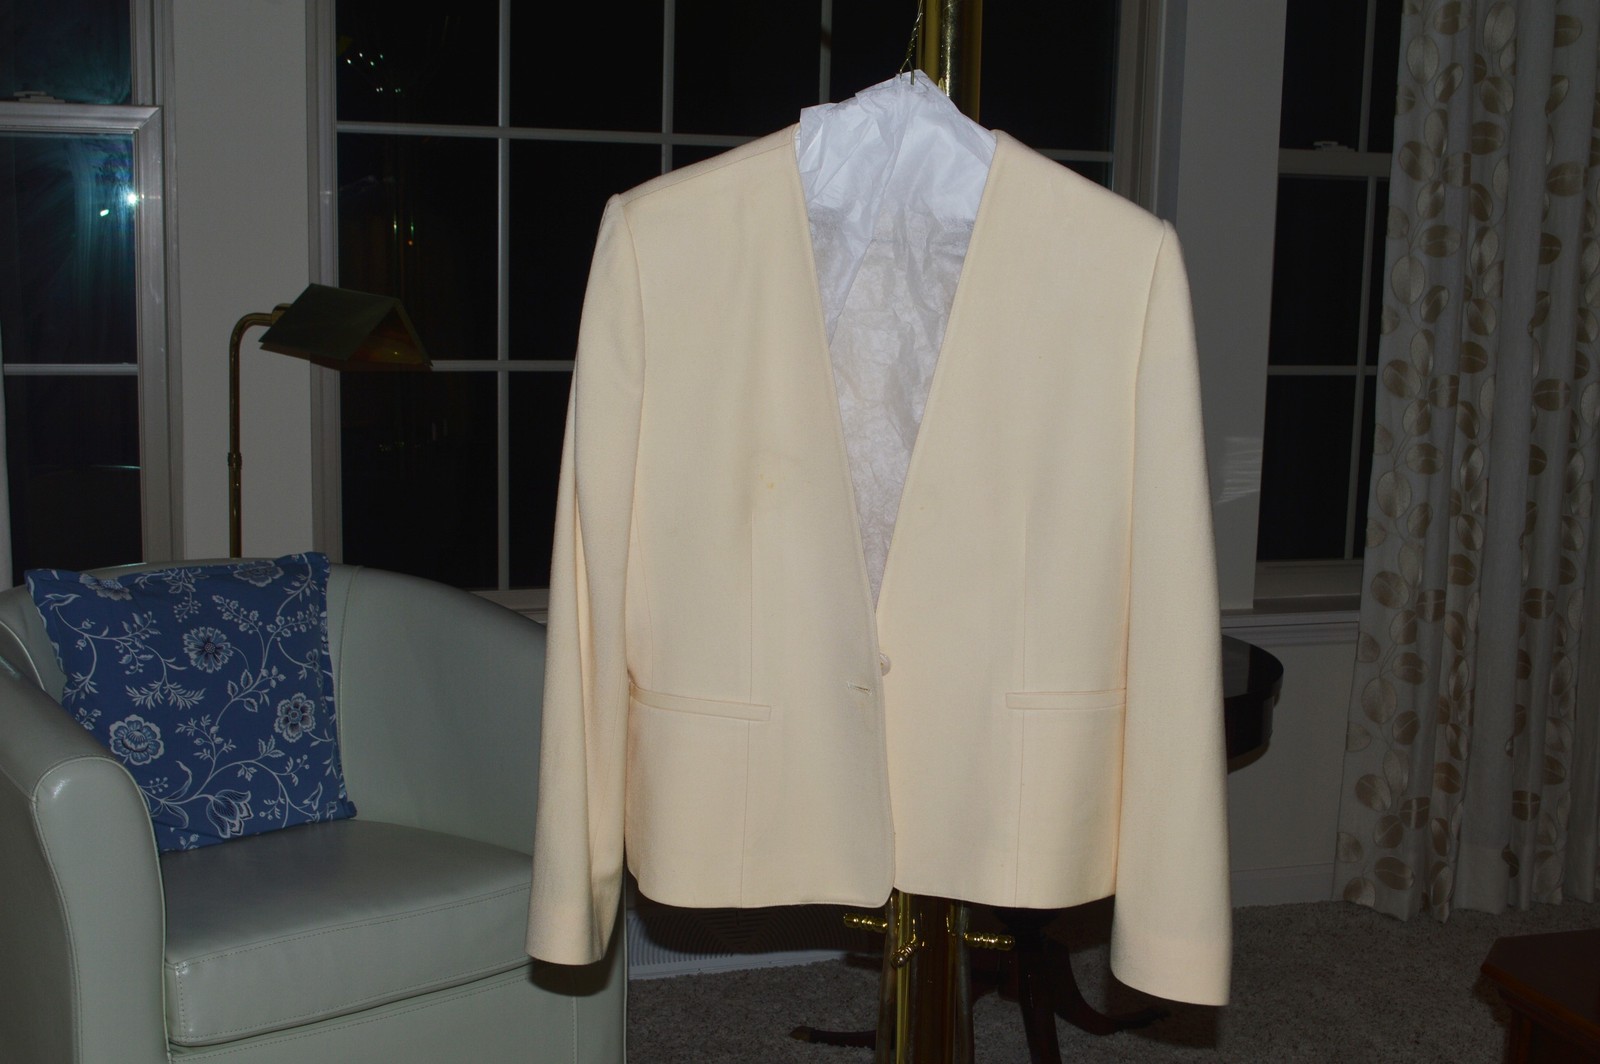 Evan Picone Wool Blend Suit, Ivory, Pre-owned Very Good Condition, Size 12 - $30.00